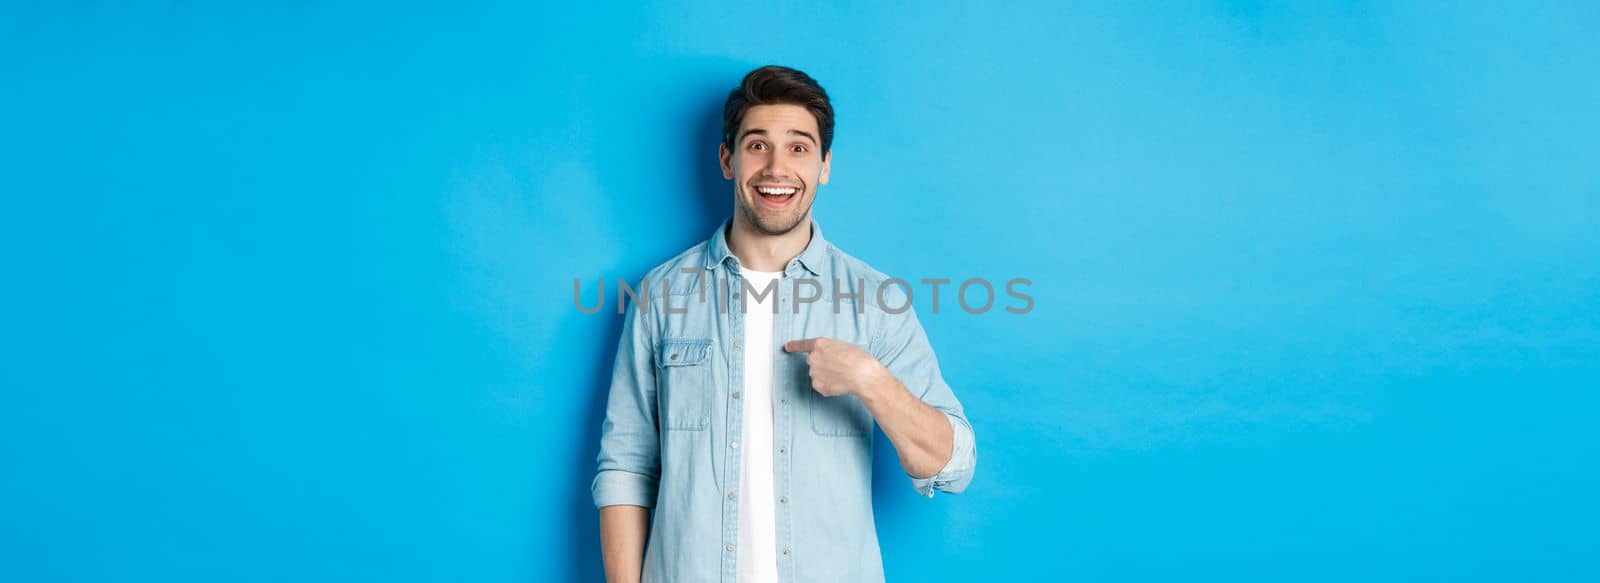 Happy and surprised man pointing at himself, smiling pleased, standing against blue background.